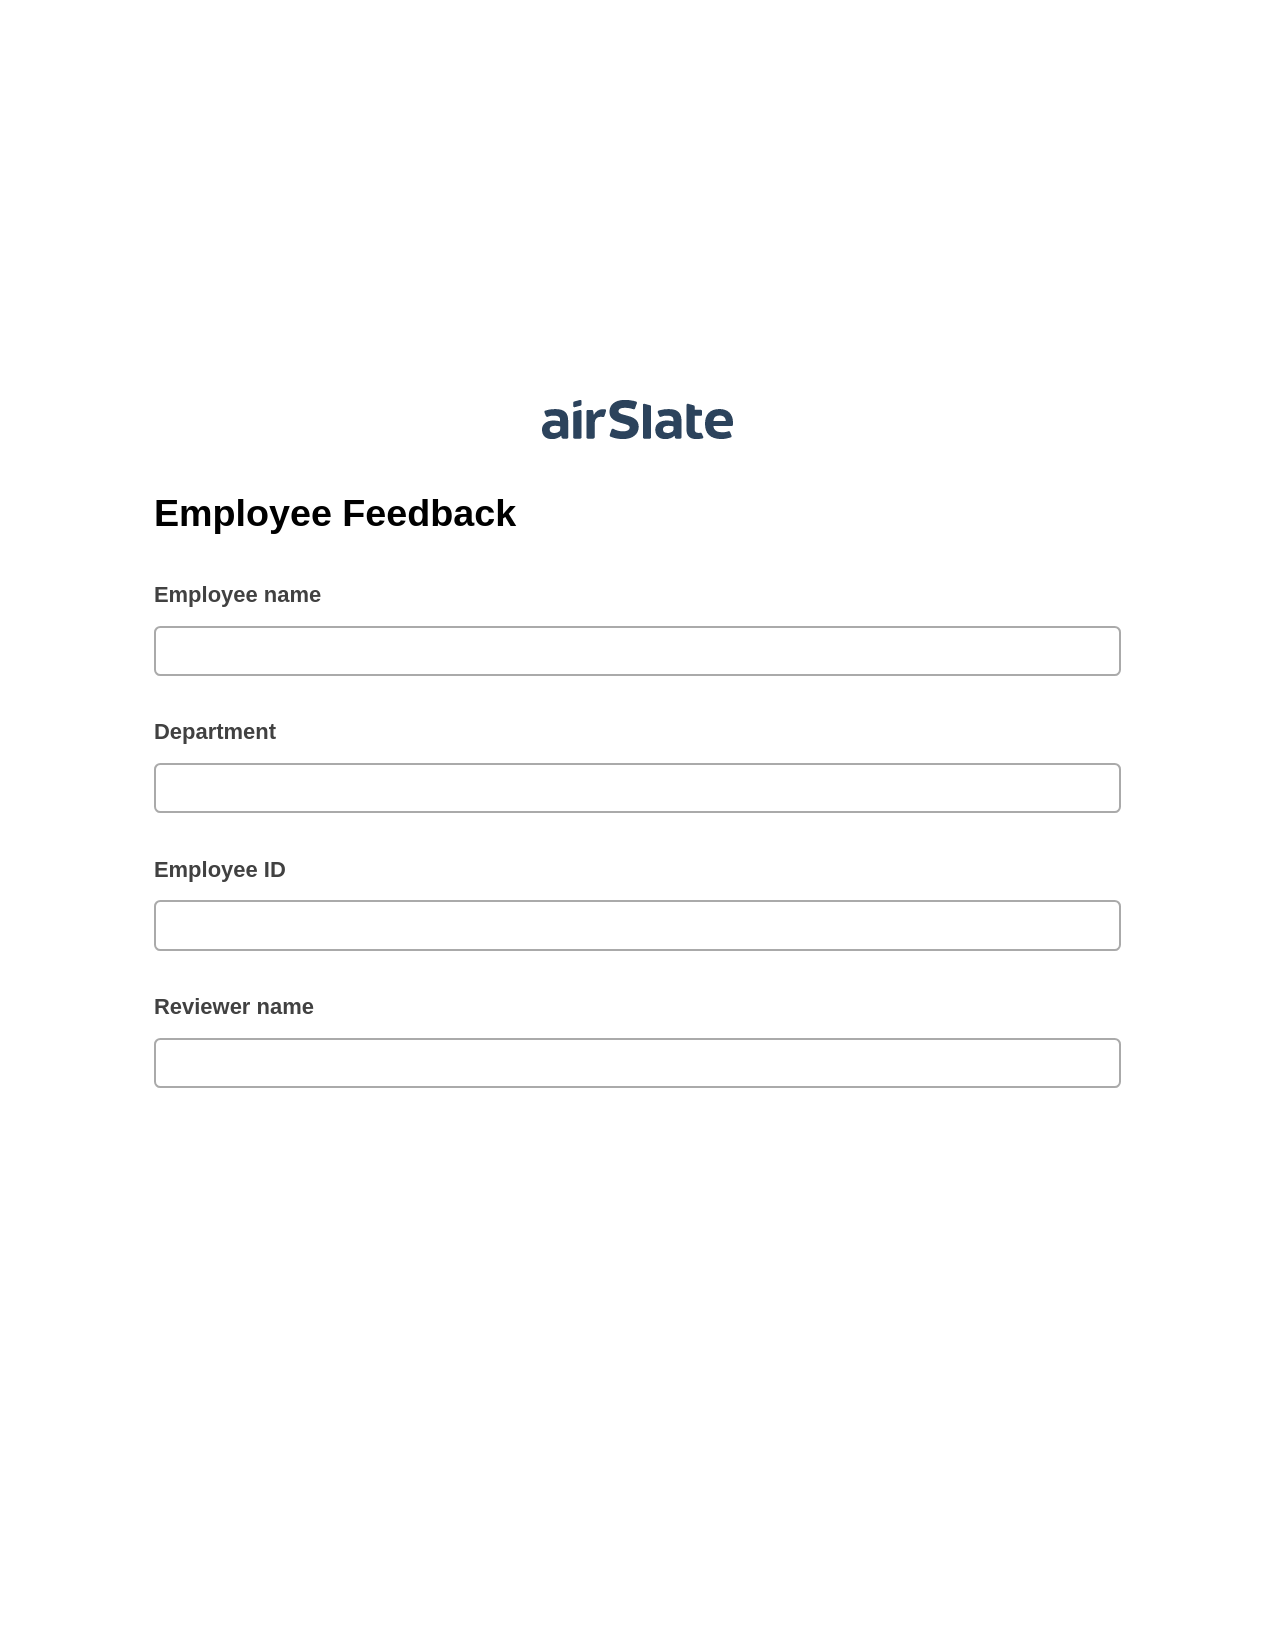 Multirole Employee Feedback Pre-fill from Salesforce Records with SOQL Bot, Mailchimp add recipient to audience Bot, Archive to SharePoint Folder Bot